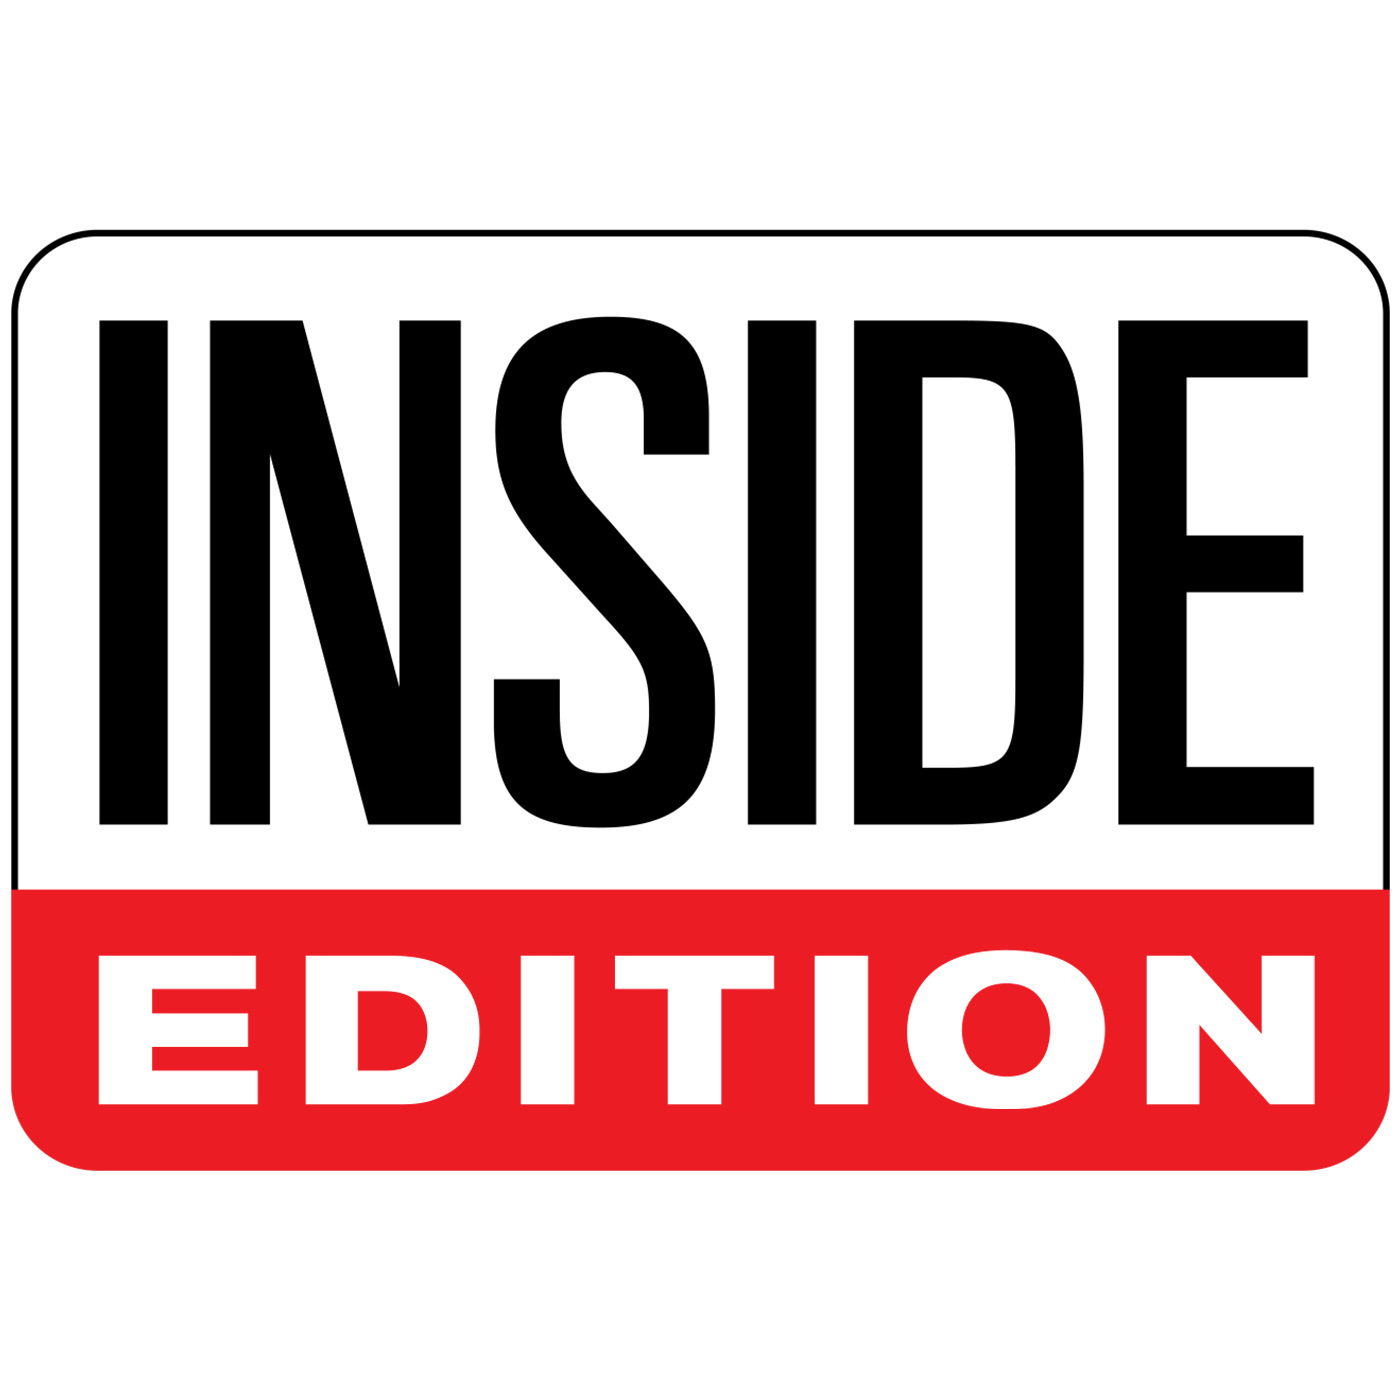 Inside Edition aired FRIDAY, DECEMBER 13, 2019